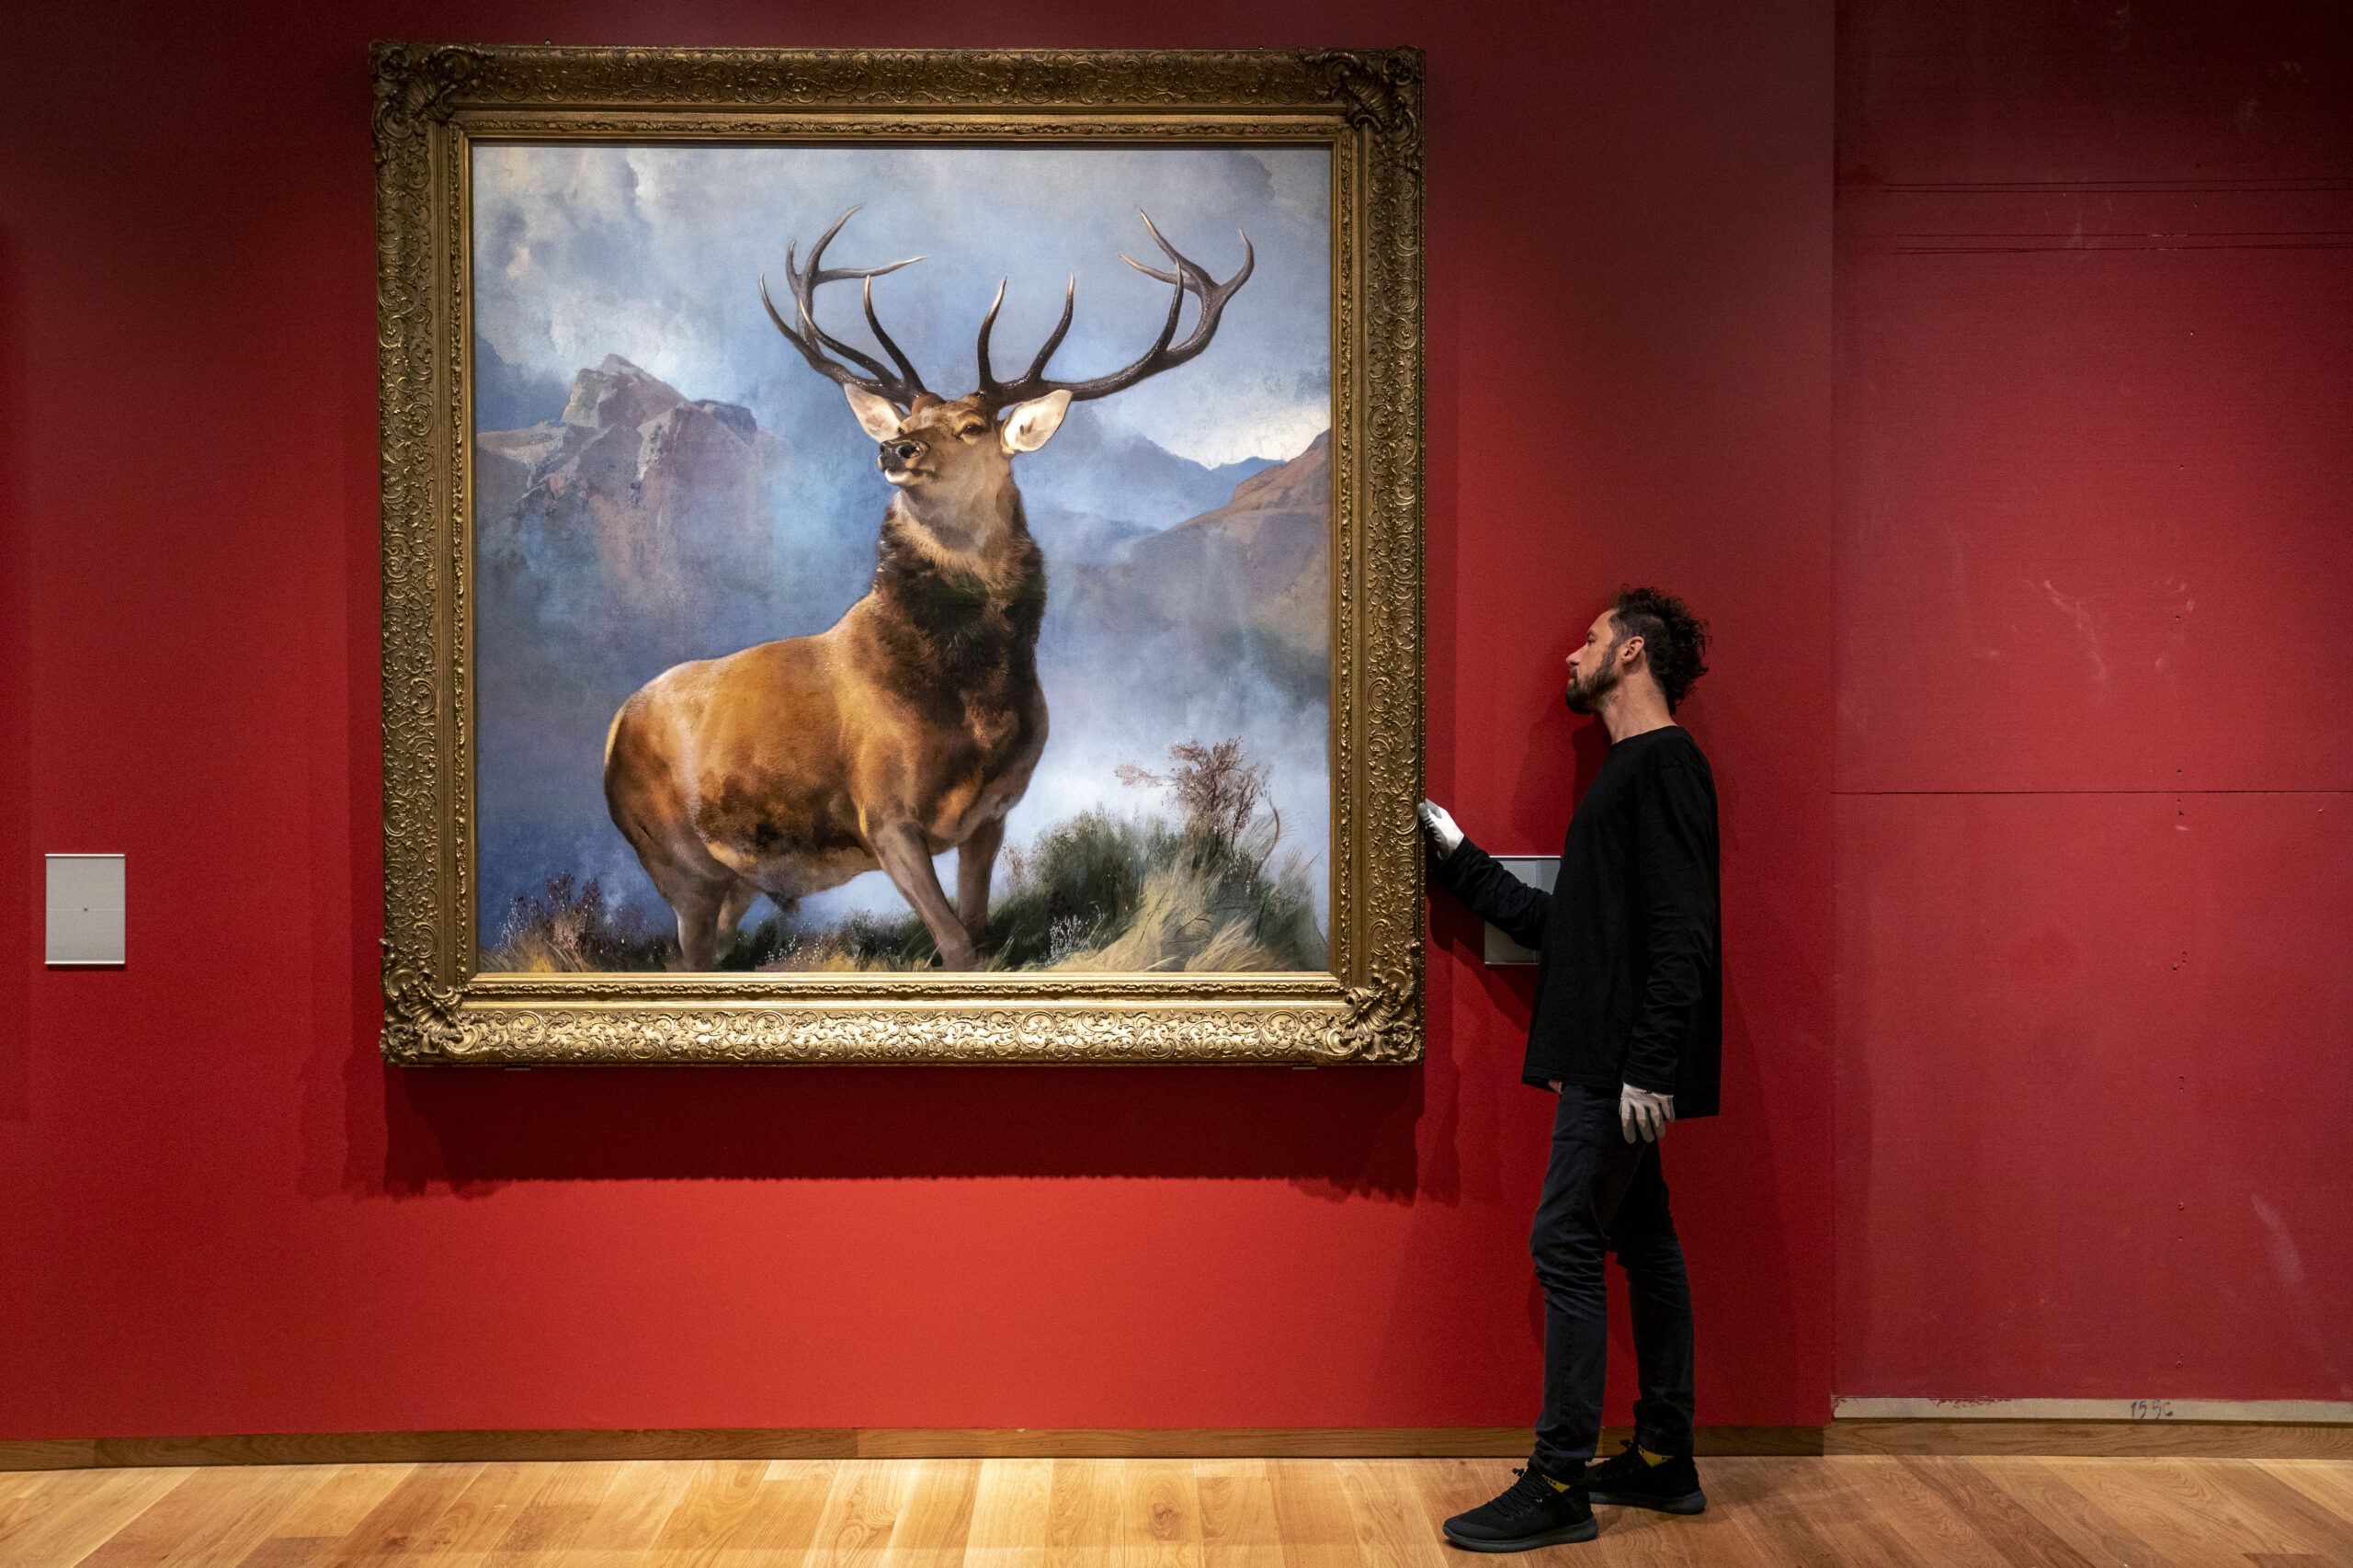 Monarch-of-the-Glen-moves-to-its-new-home-in-the-new-Scottish-galleries-at-the-National.-Credit-Jane-Barlow-7-15ht28m0s-scaled